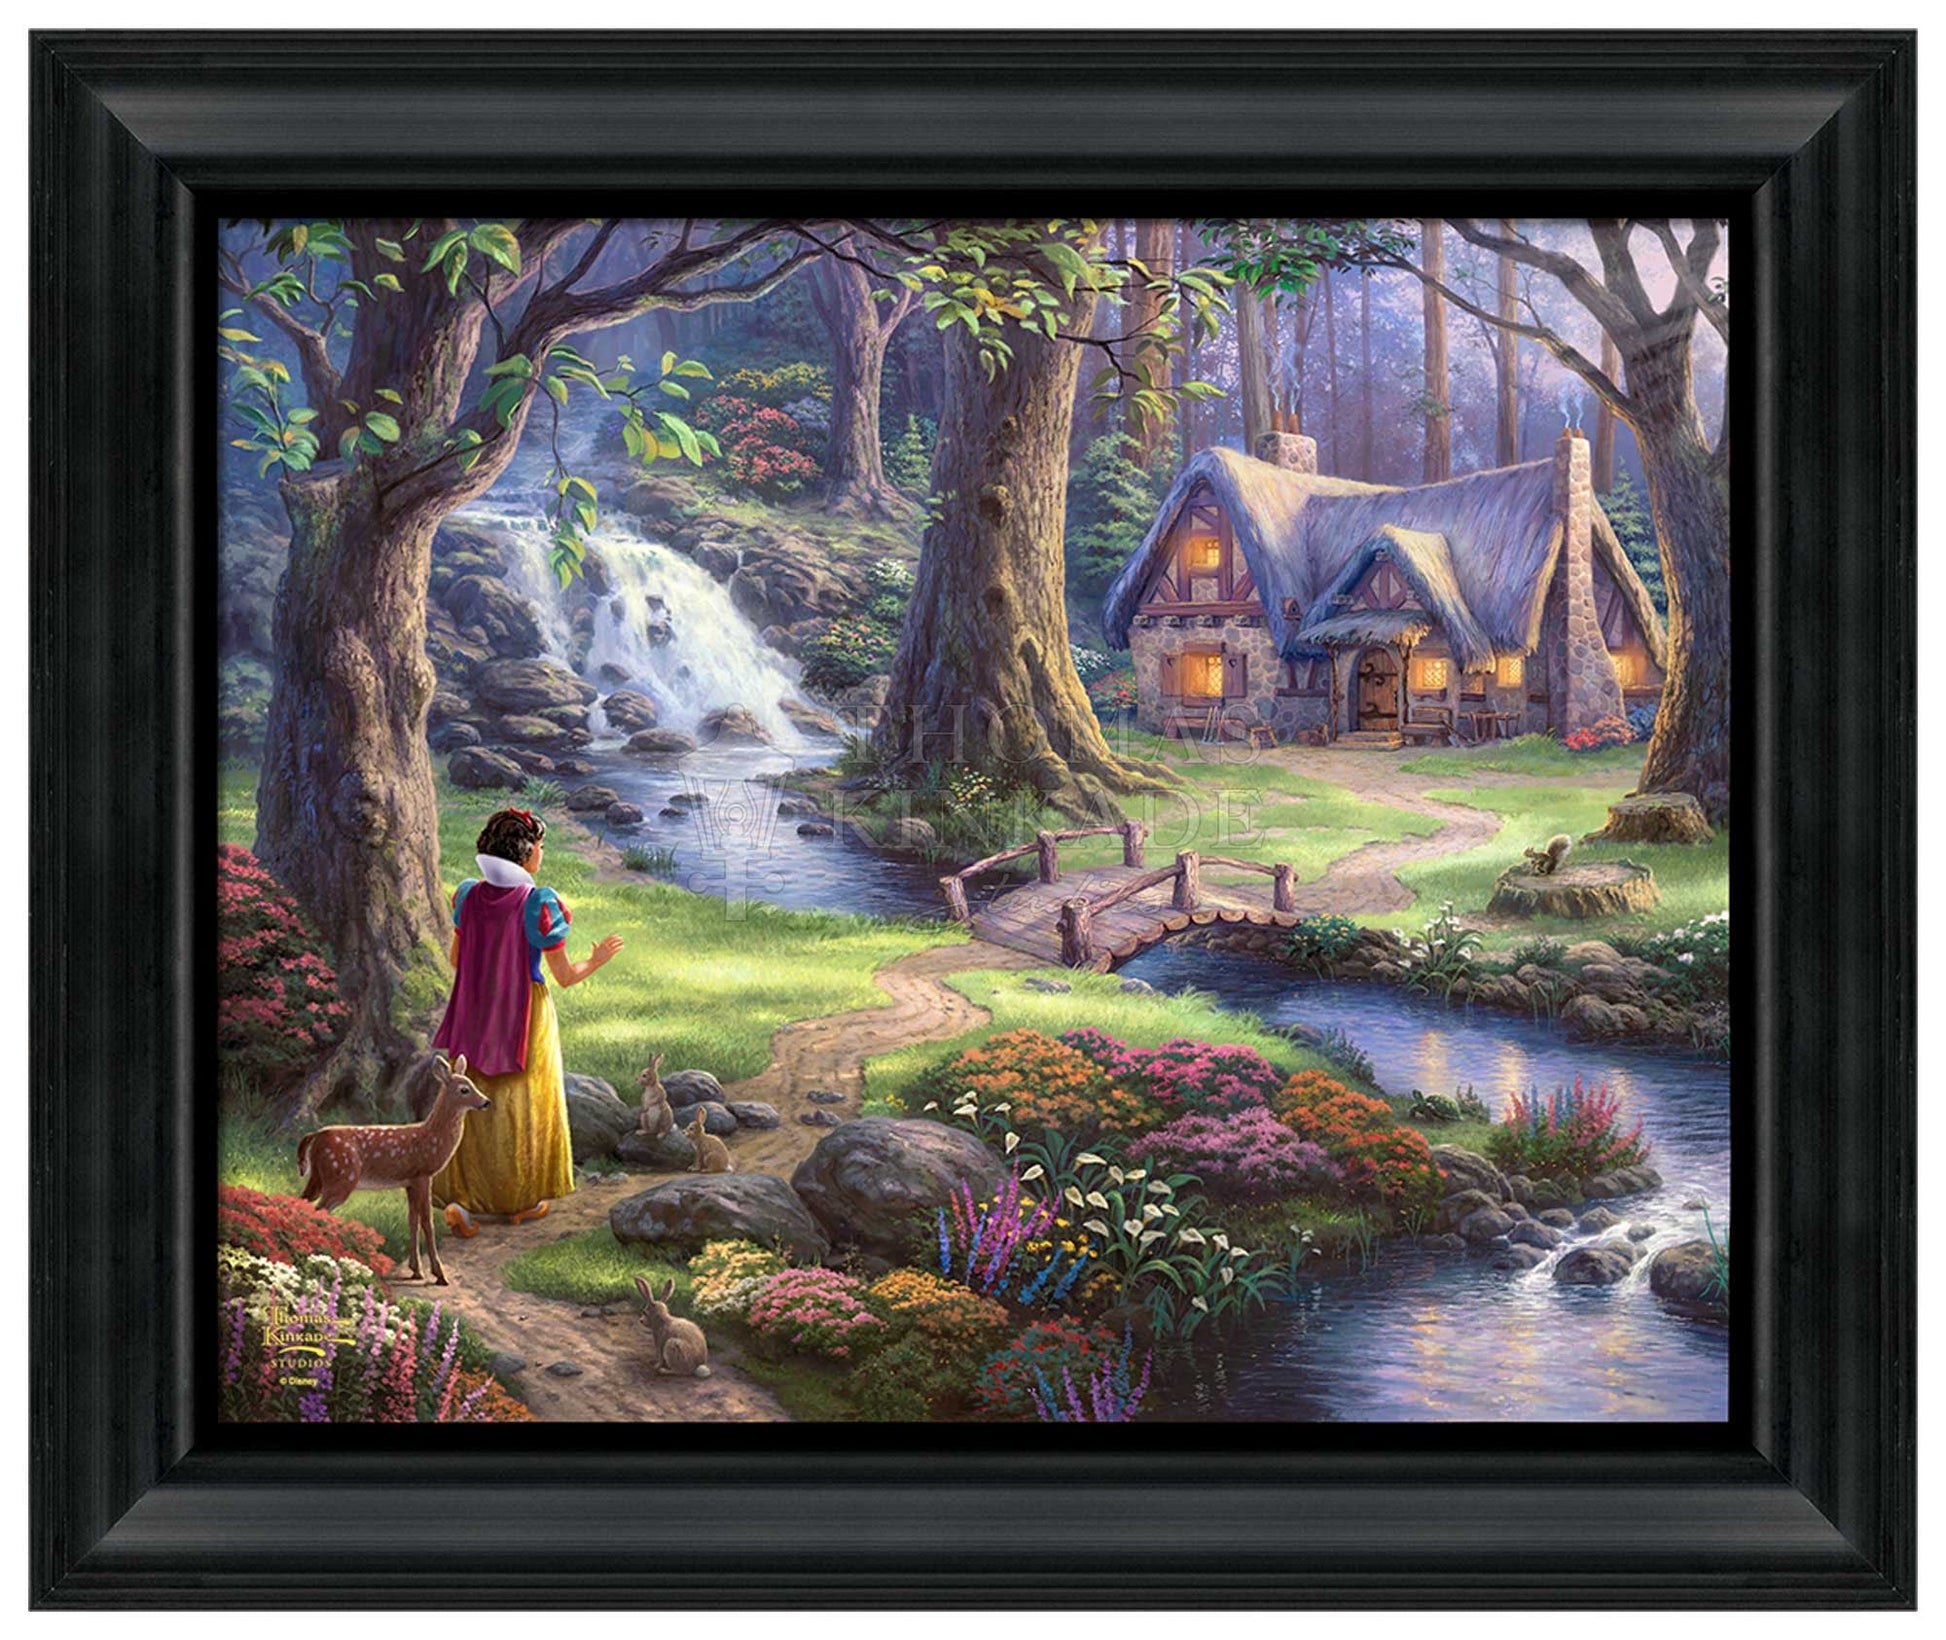 Snow White wanders through the forest seeking refuge from the Evil Queen, when comes across a small cottage nestled in the forest.